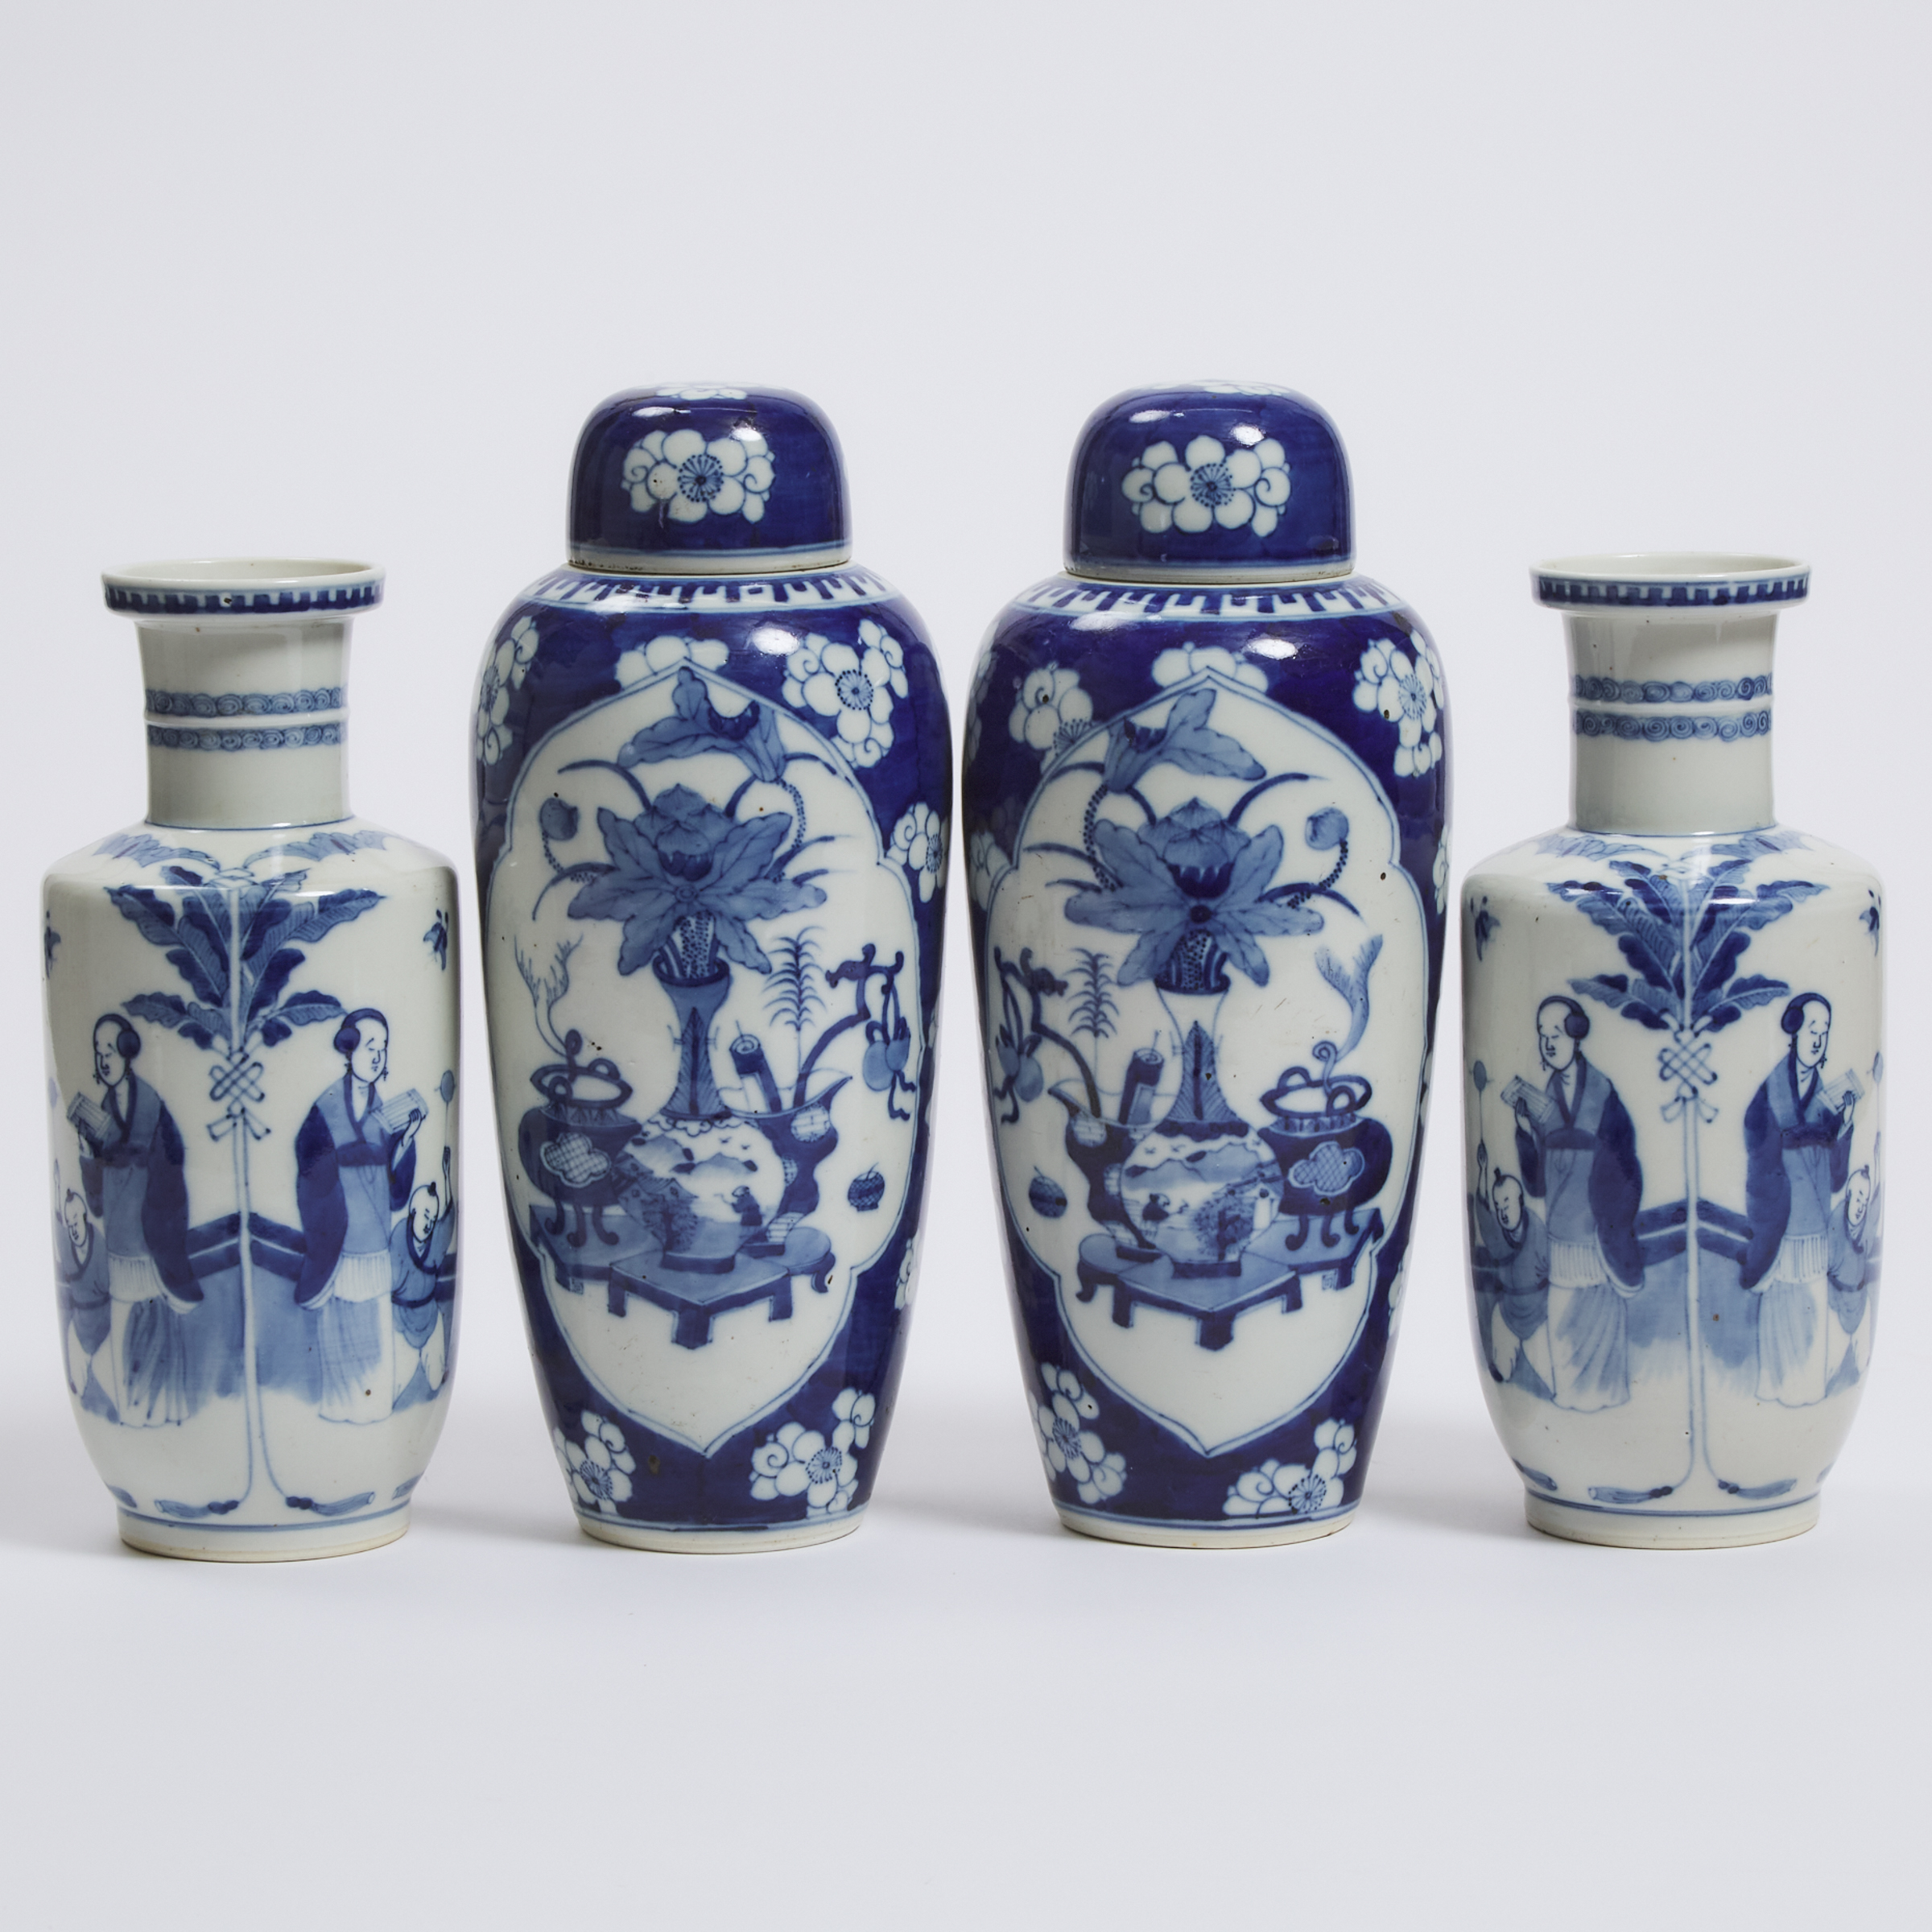 Two Pairs of Kangxi-Style Blue and White Vases, 19th Century